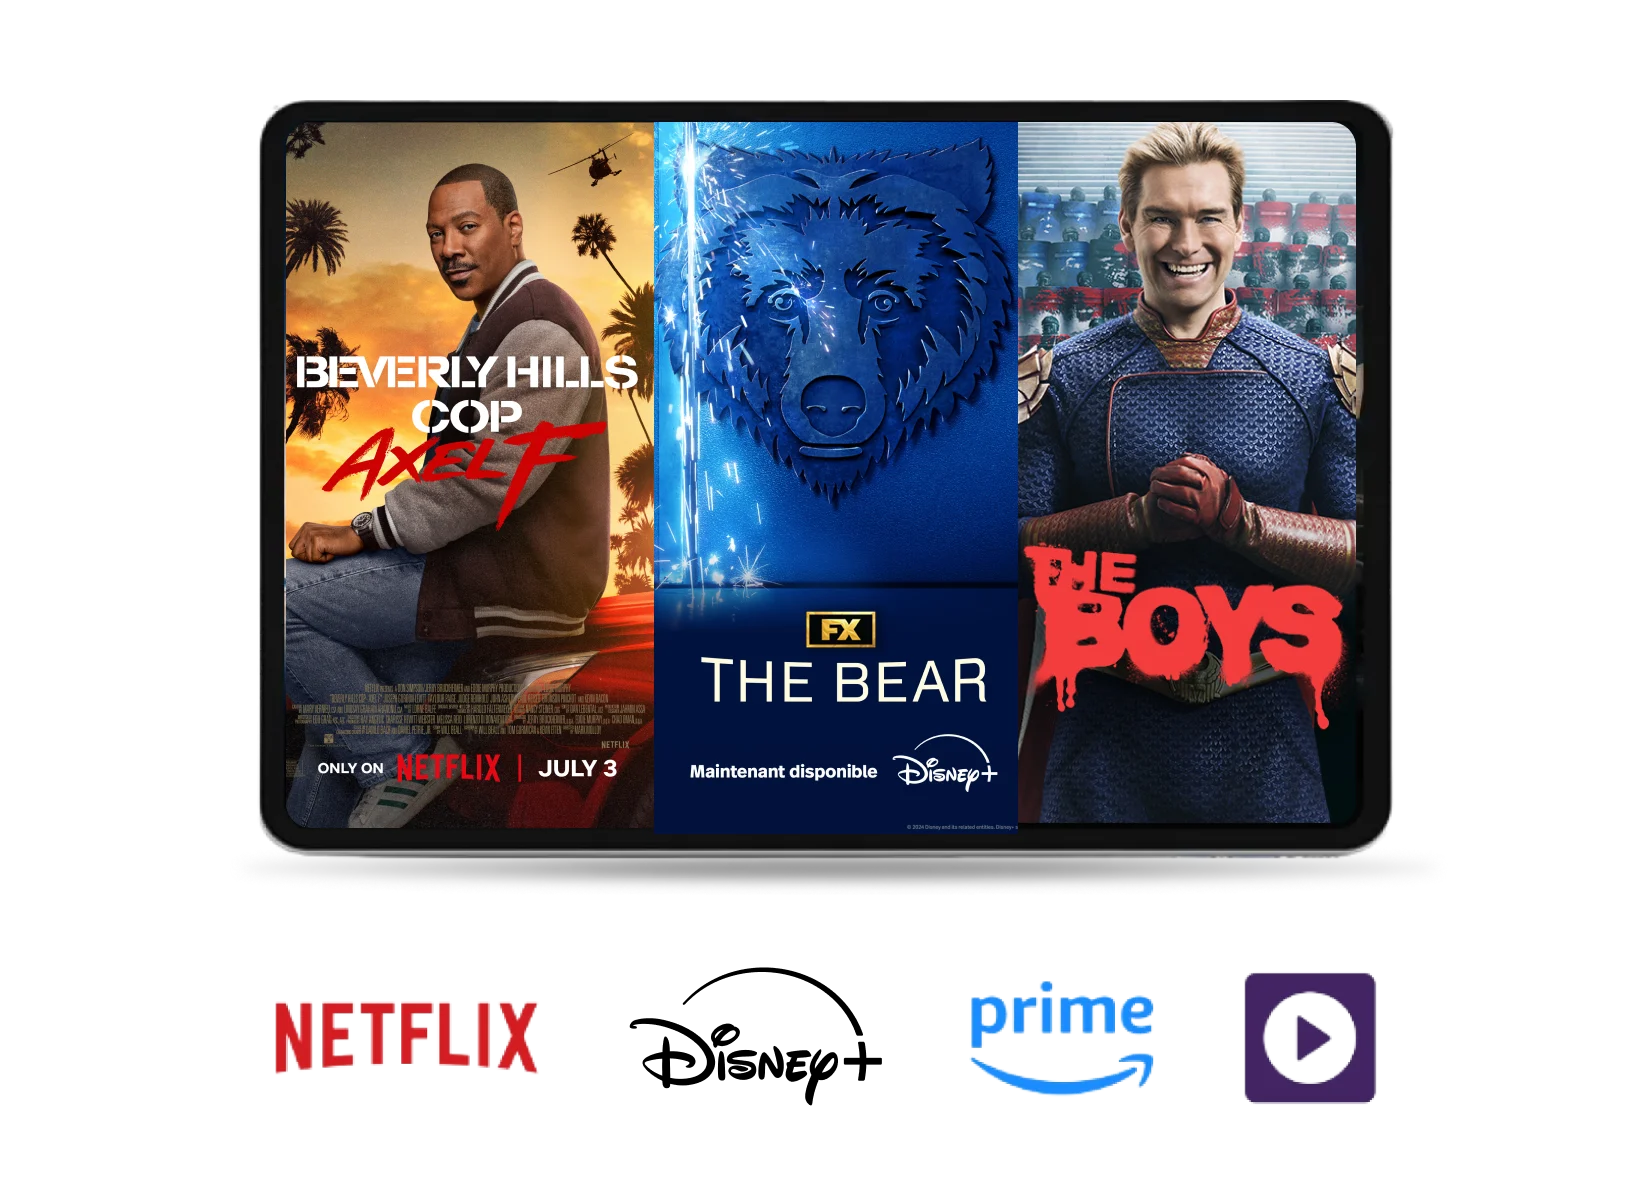 A tablet displaying three popular Stream+ series; Beverly Hills Cop Axel F on Netflix, The Bear on Disney+, The Boys on Prime.